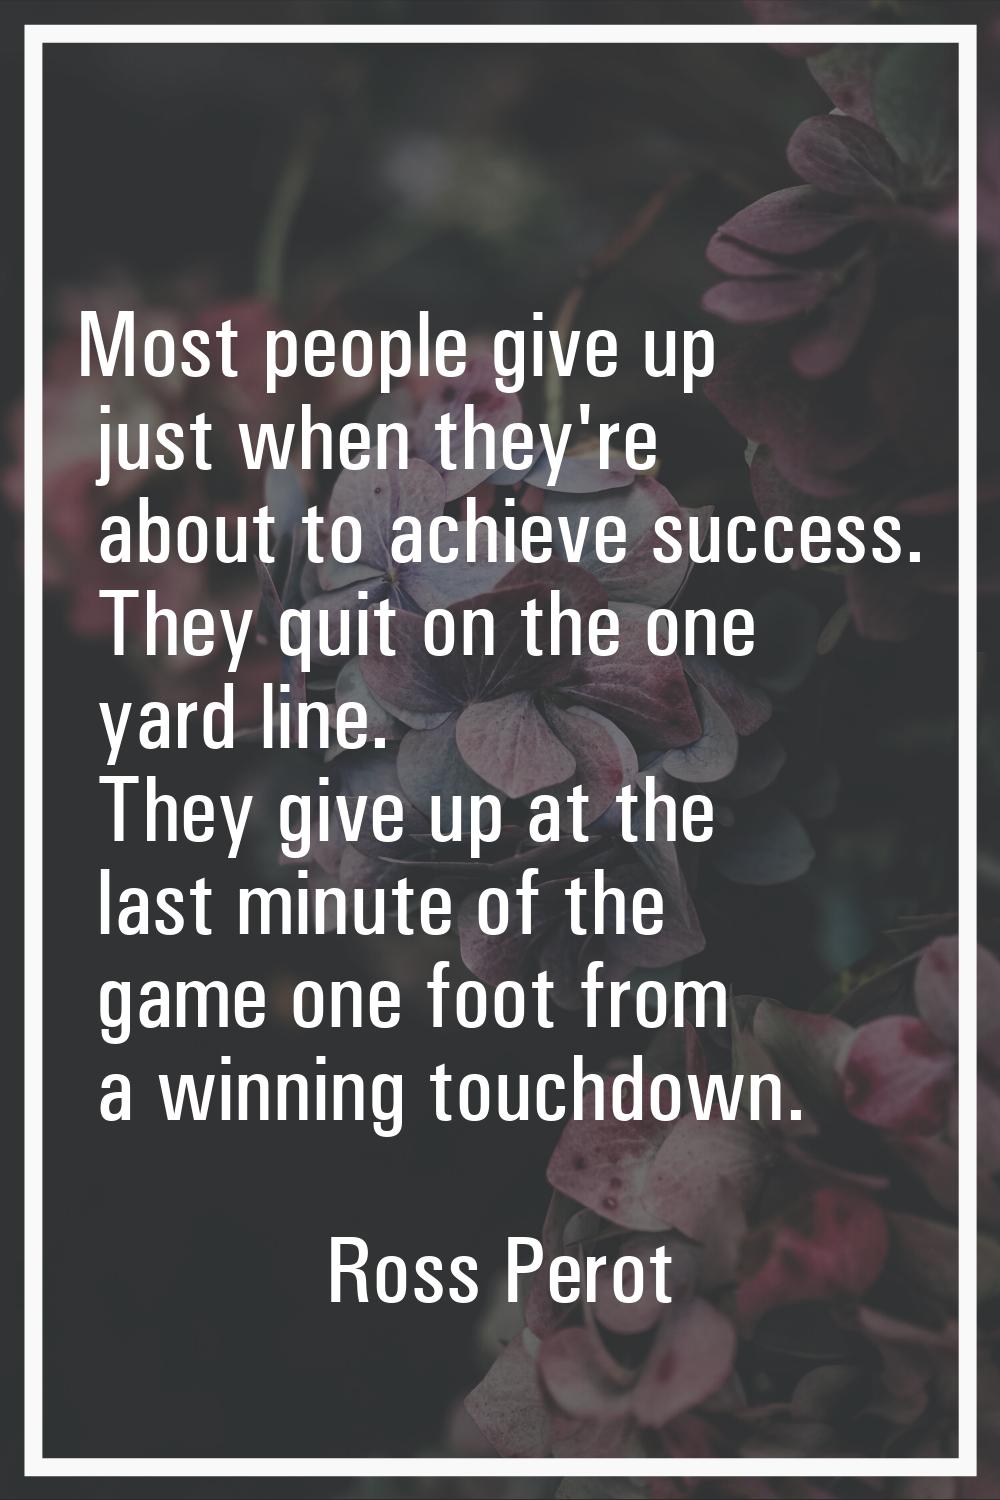 Most people give up just when they're about to achieve success. They quit on the one yard line. The